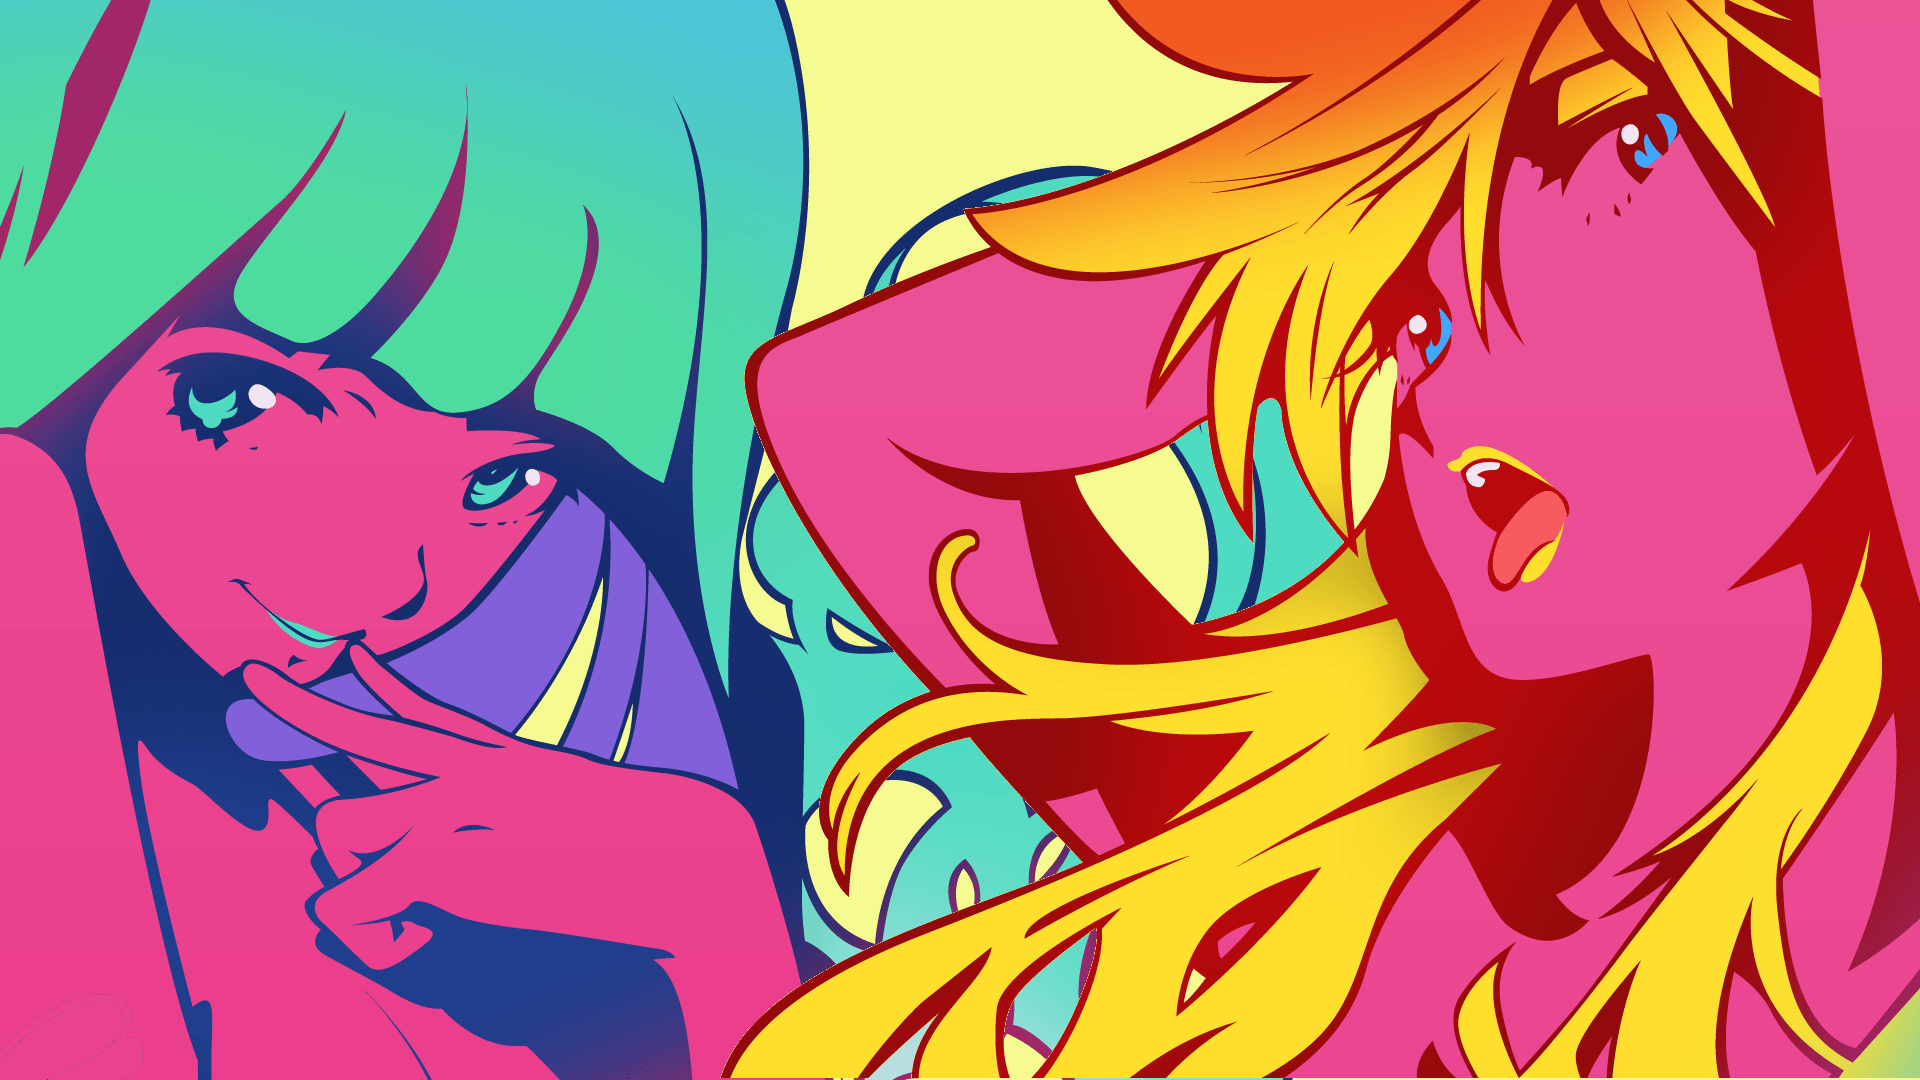 Panty and stocking [1920 × 1080]